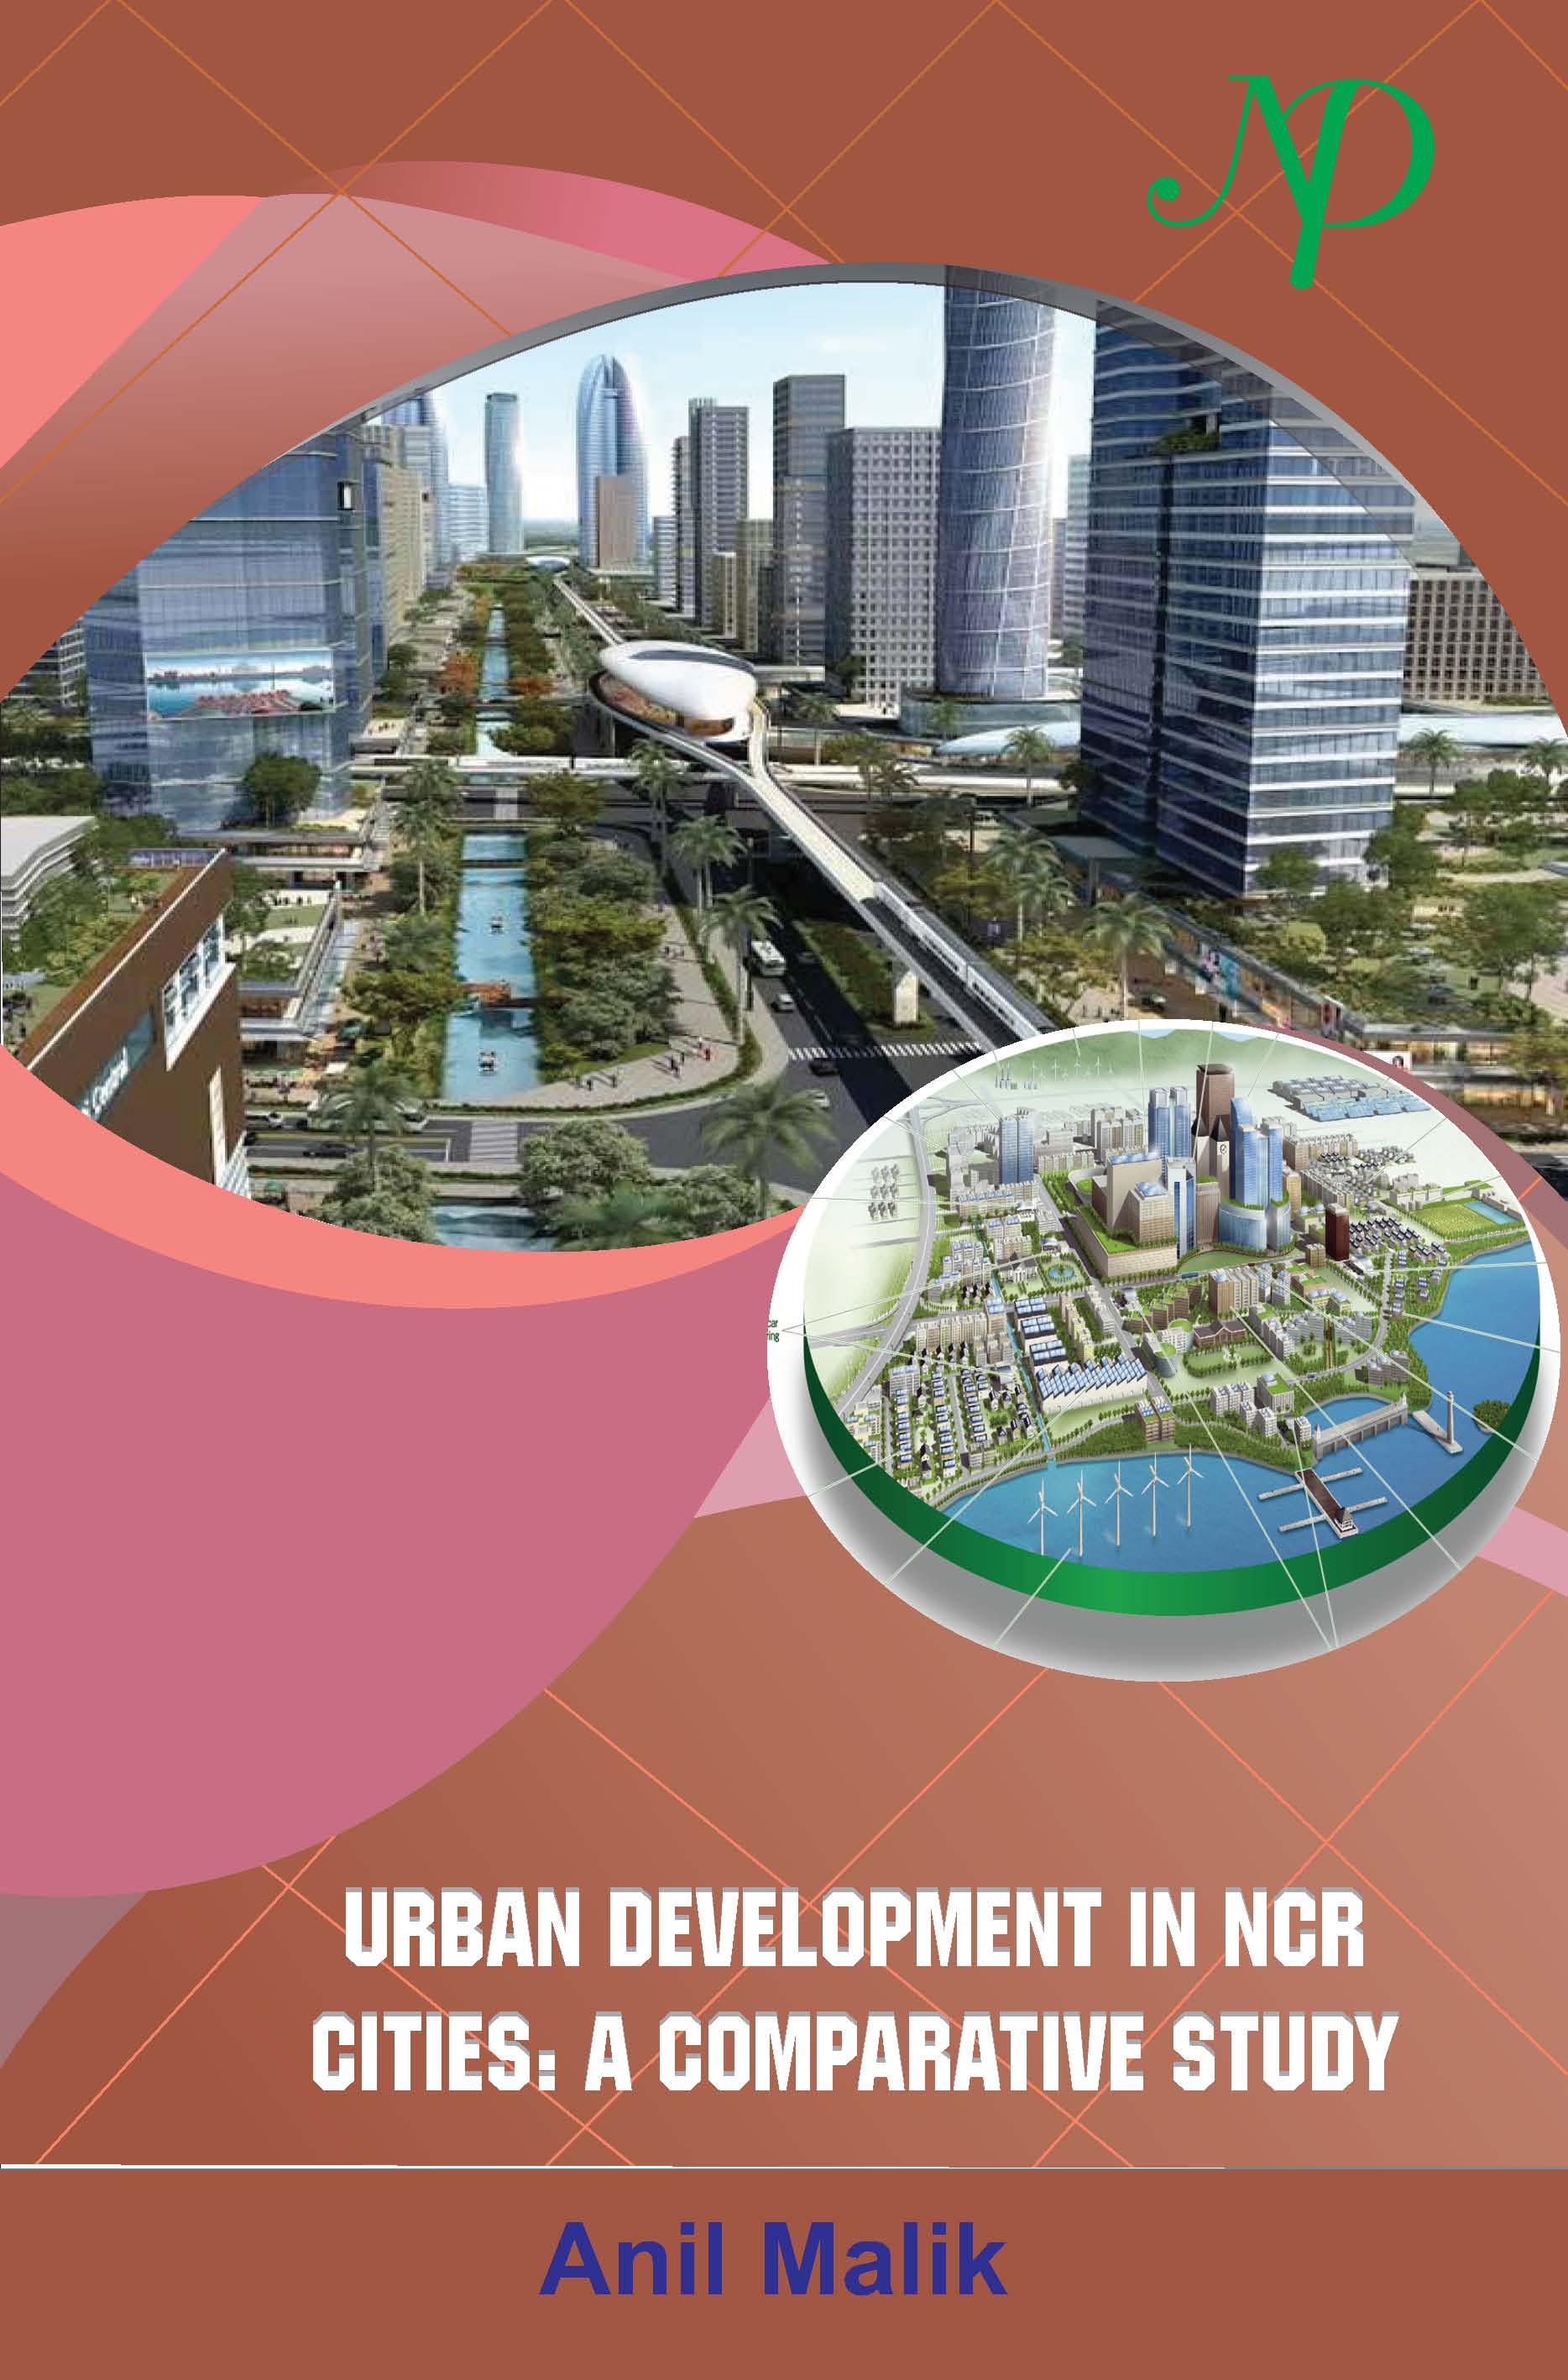 Urban Development in NCR Cities: A Comparative Study